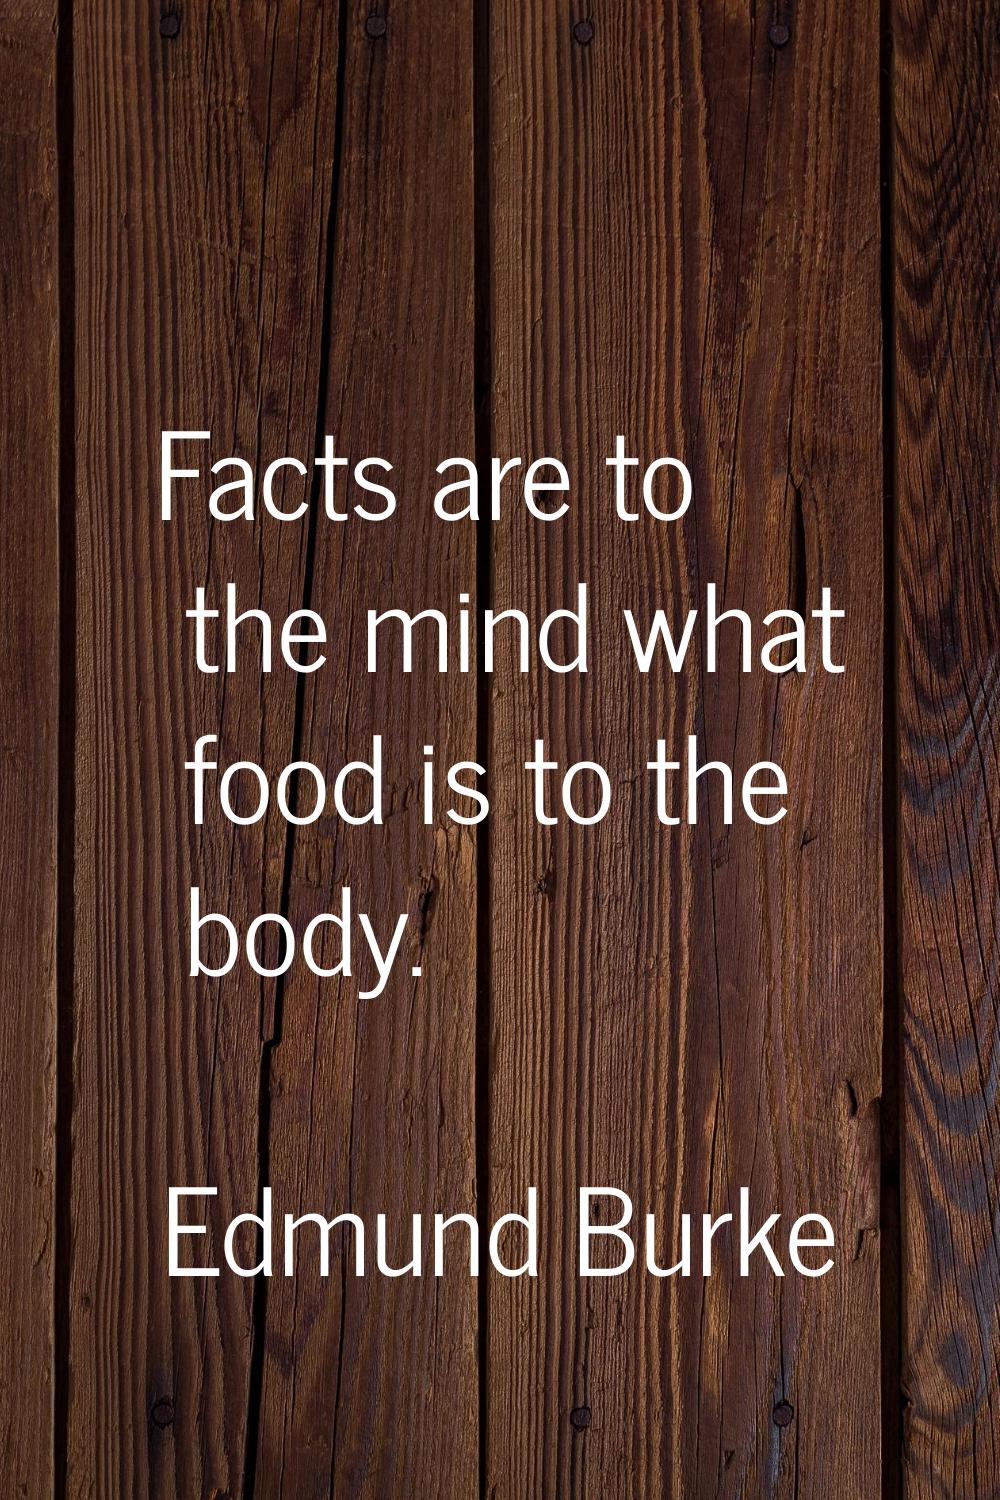 Facts are to the mind what food is to the body.